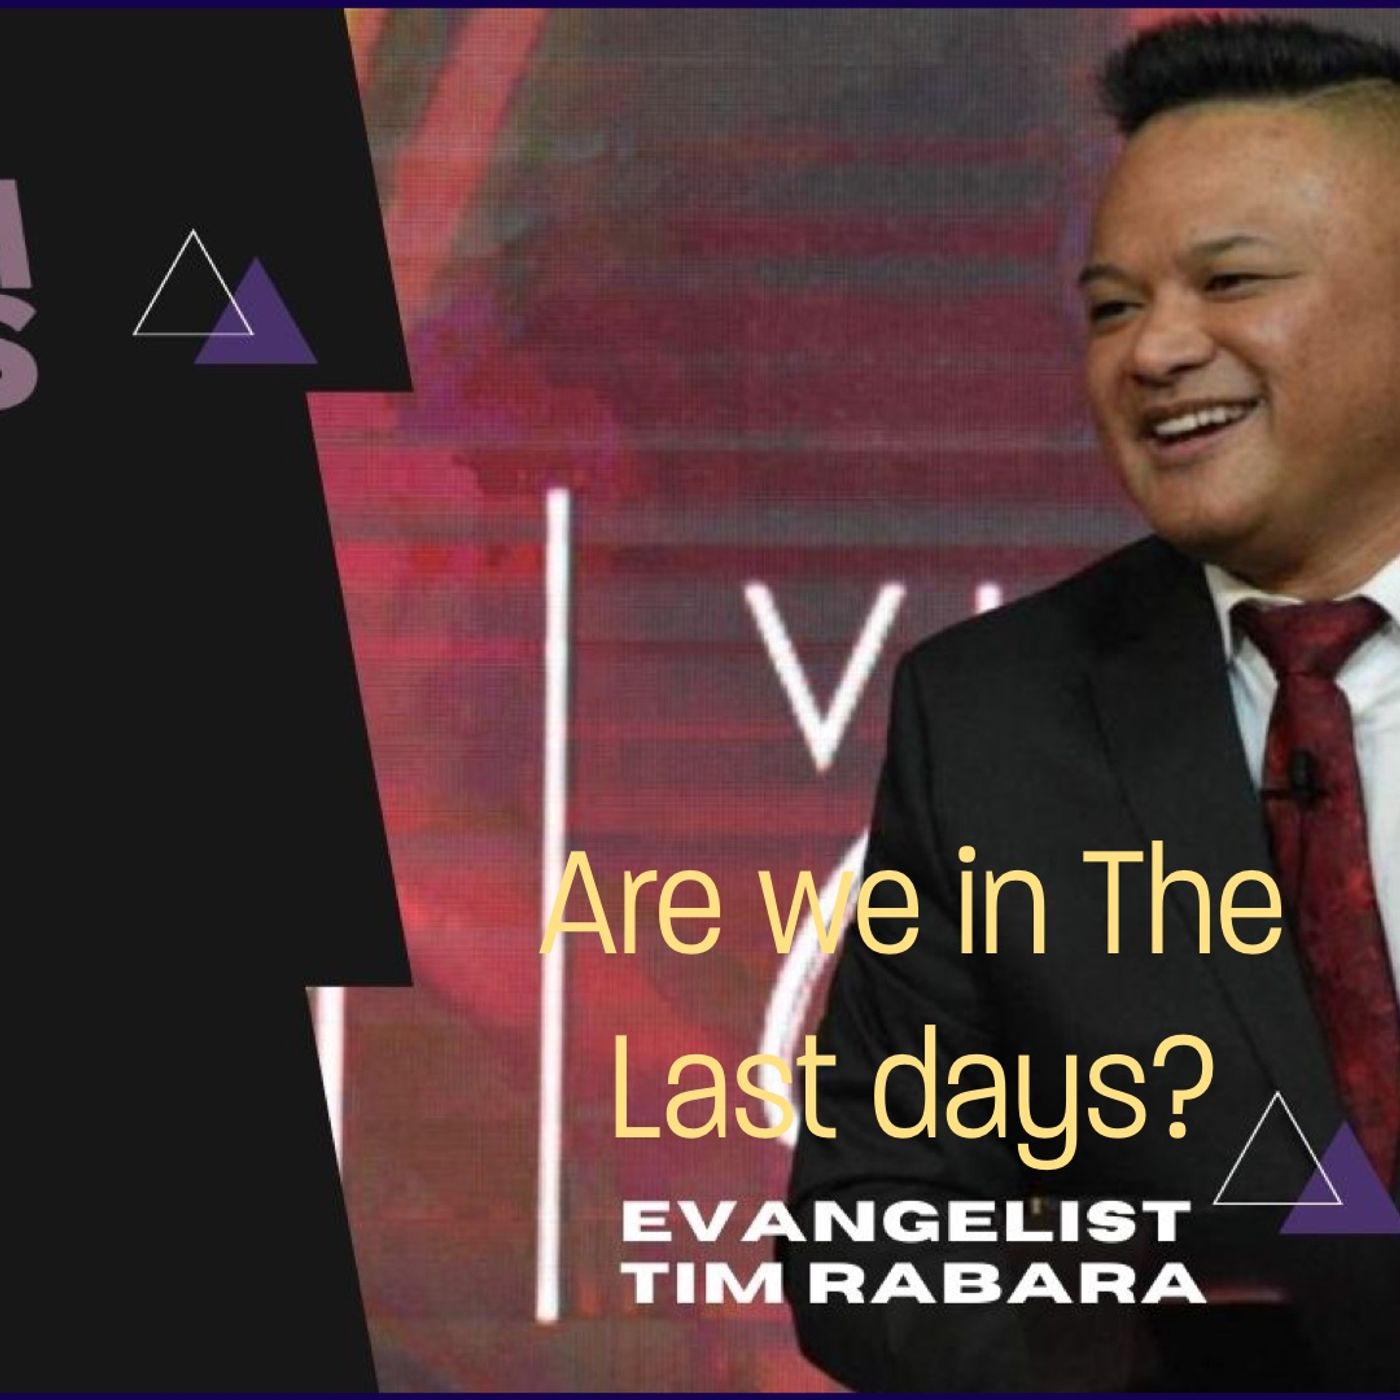 End Times Podcast With Evangelist Tim Rabara | Preparing for the Second Coming of Jesus